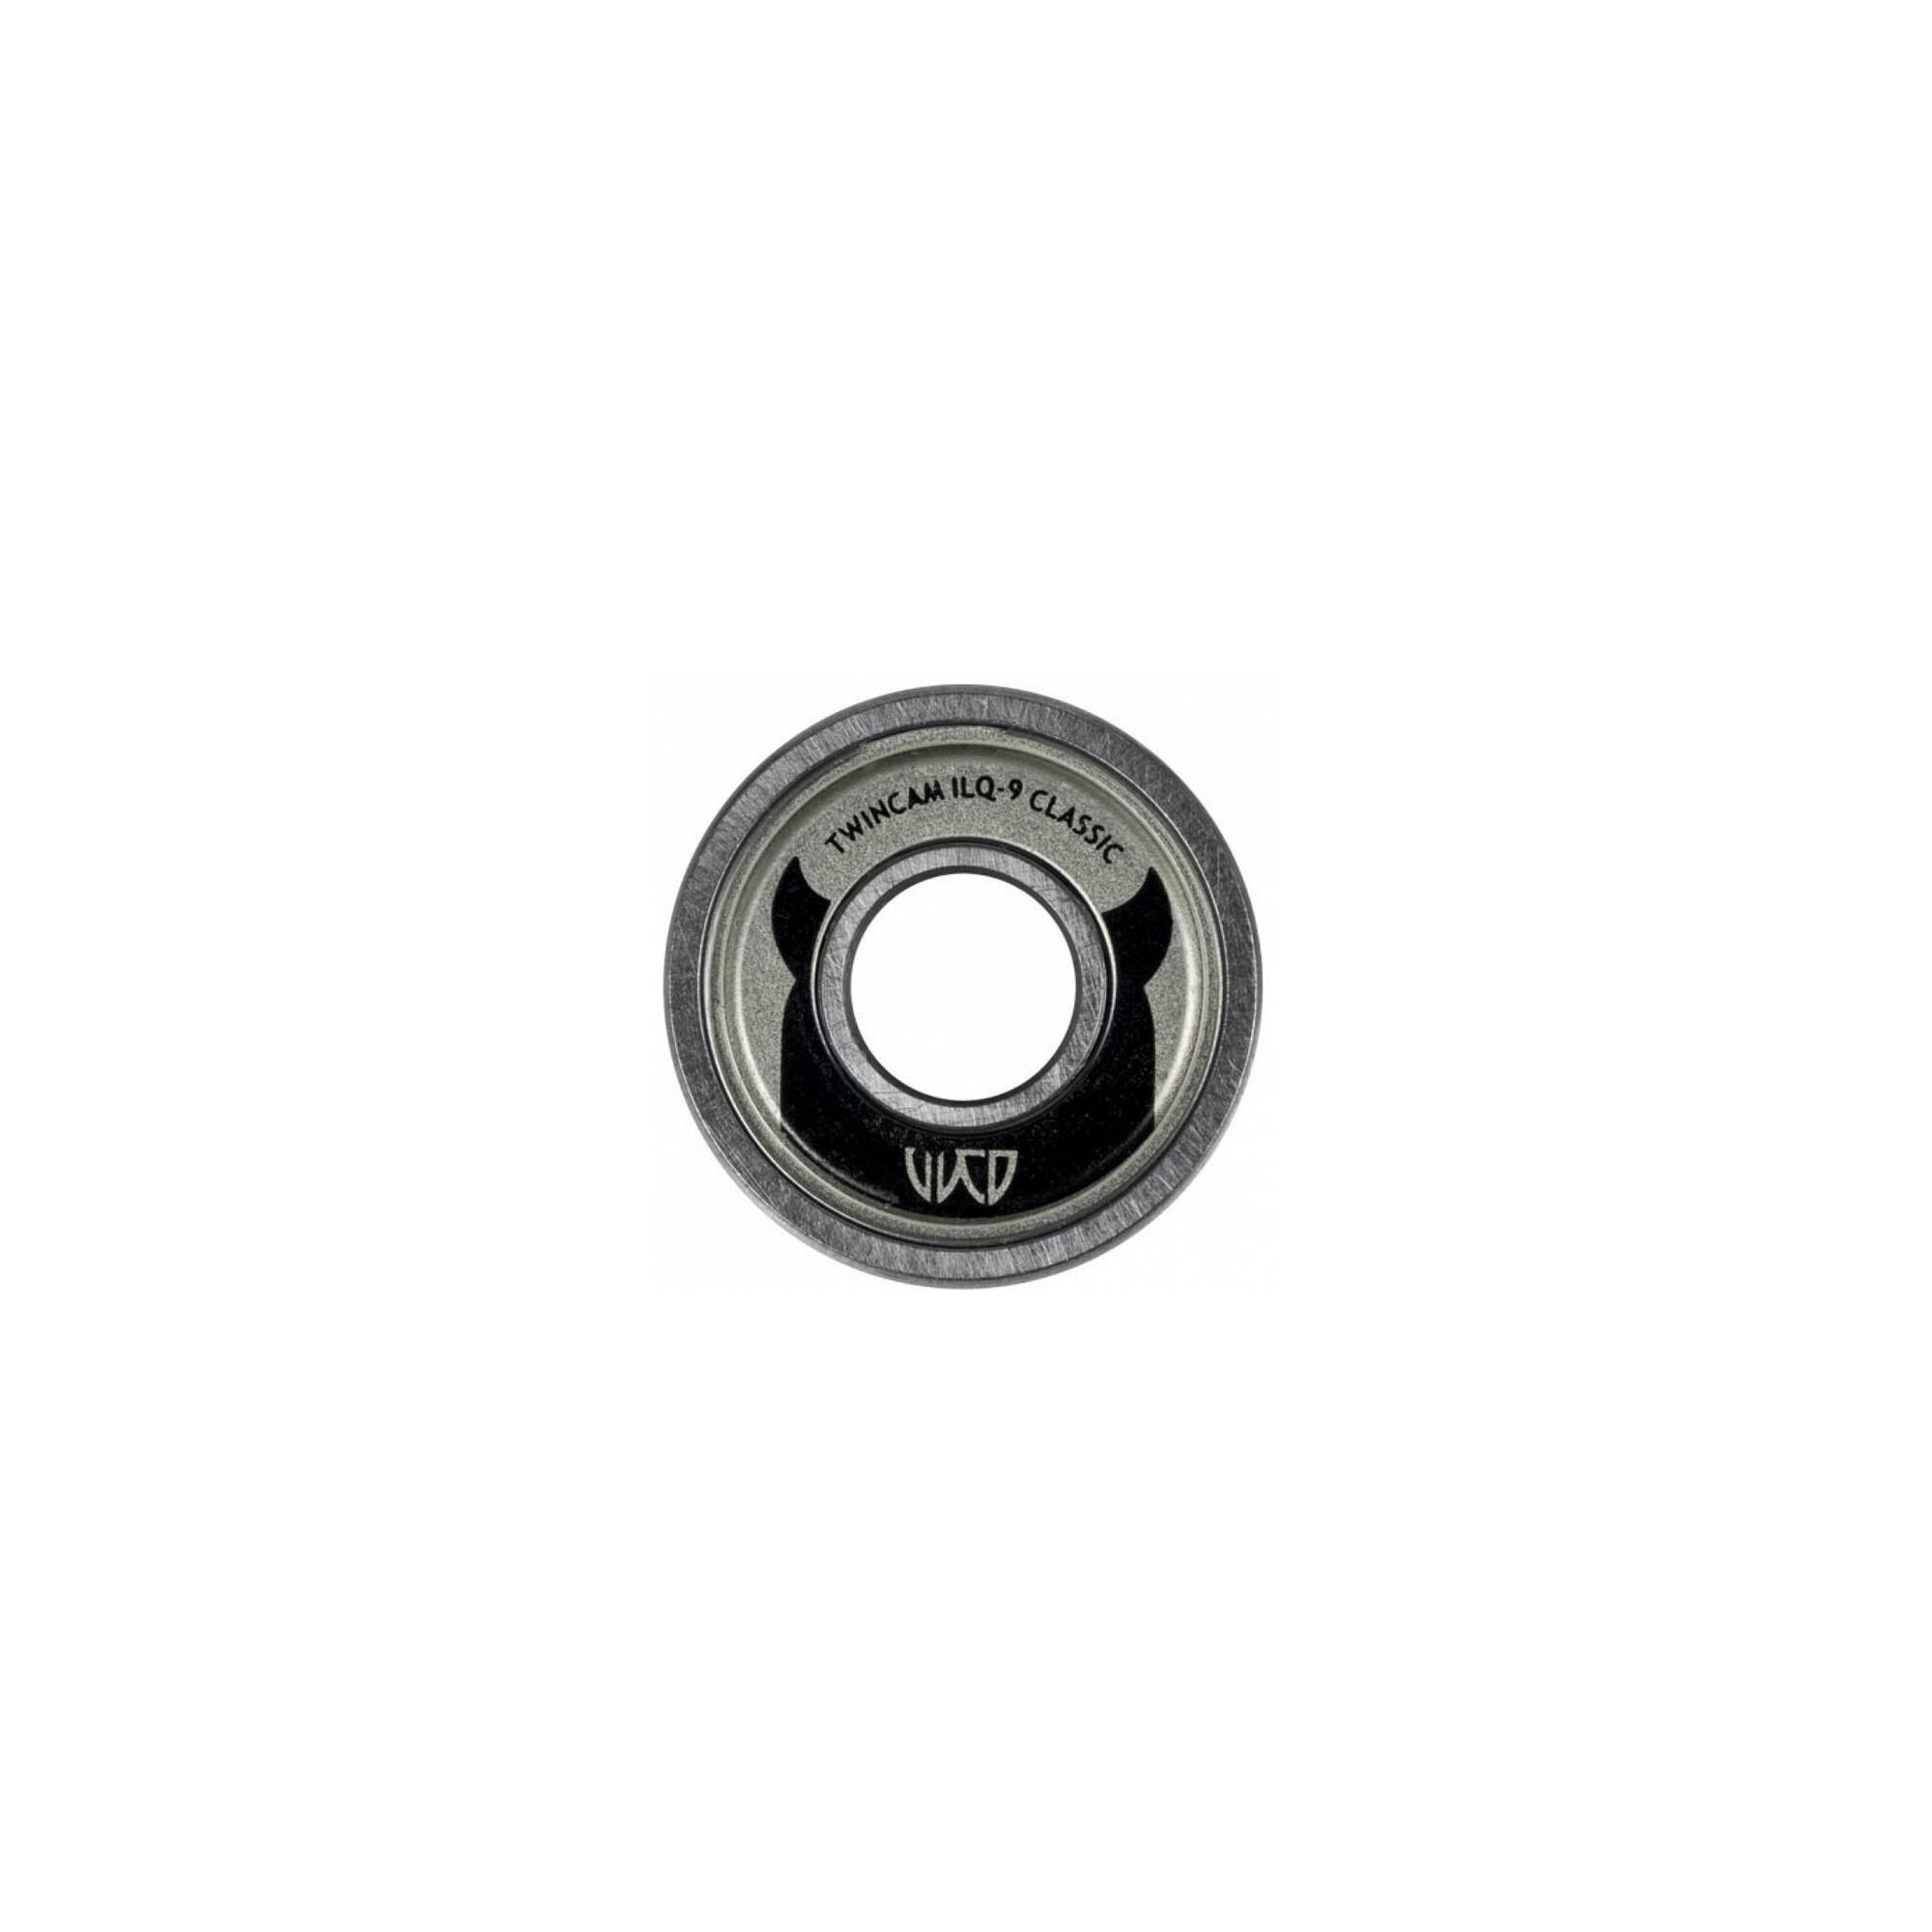 WICKED ILQ9 Inline Skates Skateboard Scooter Bearings Wicked 16-Pack